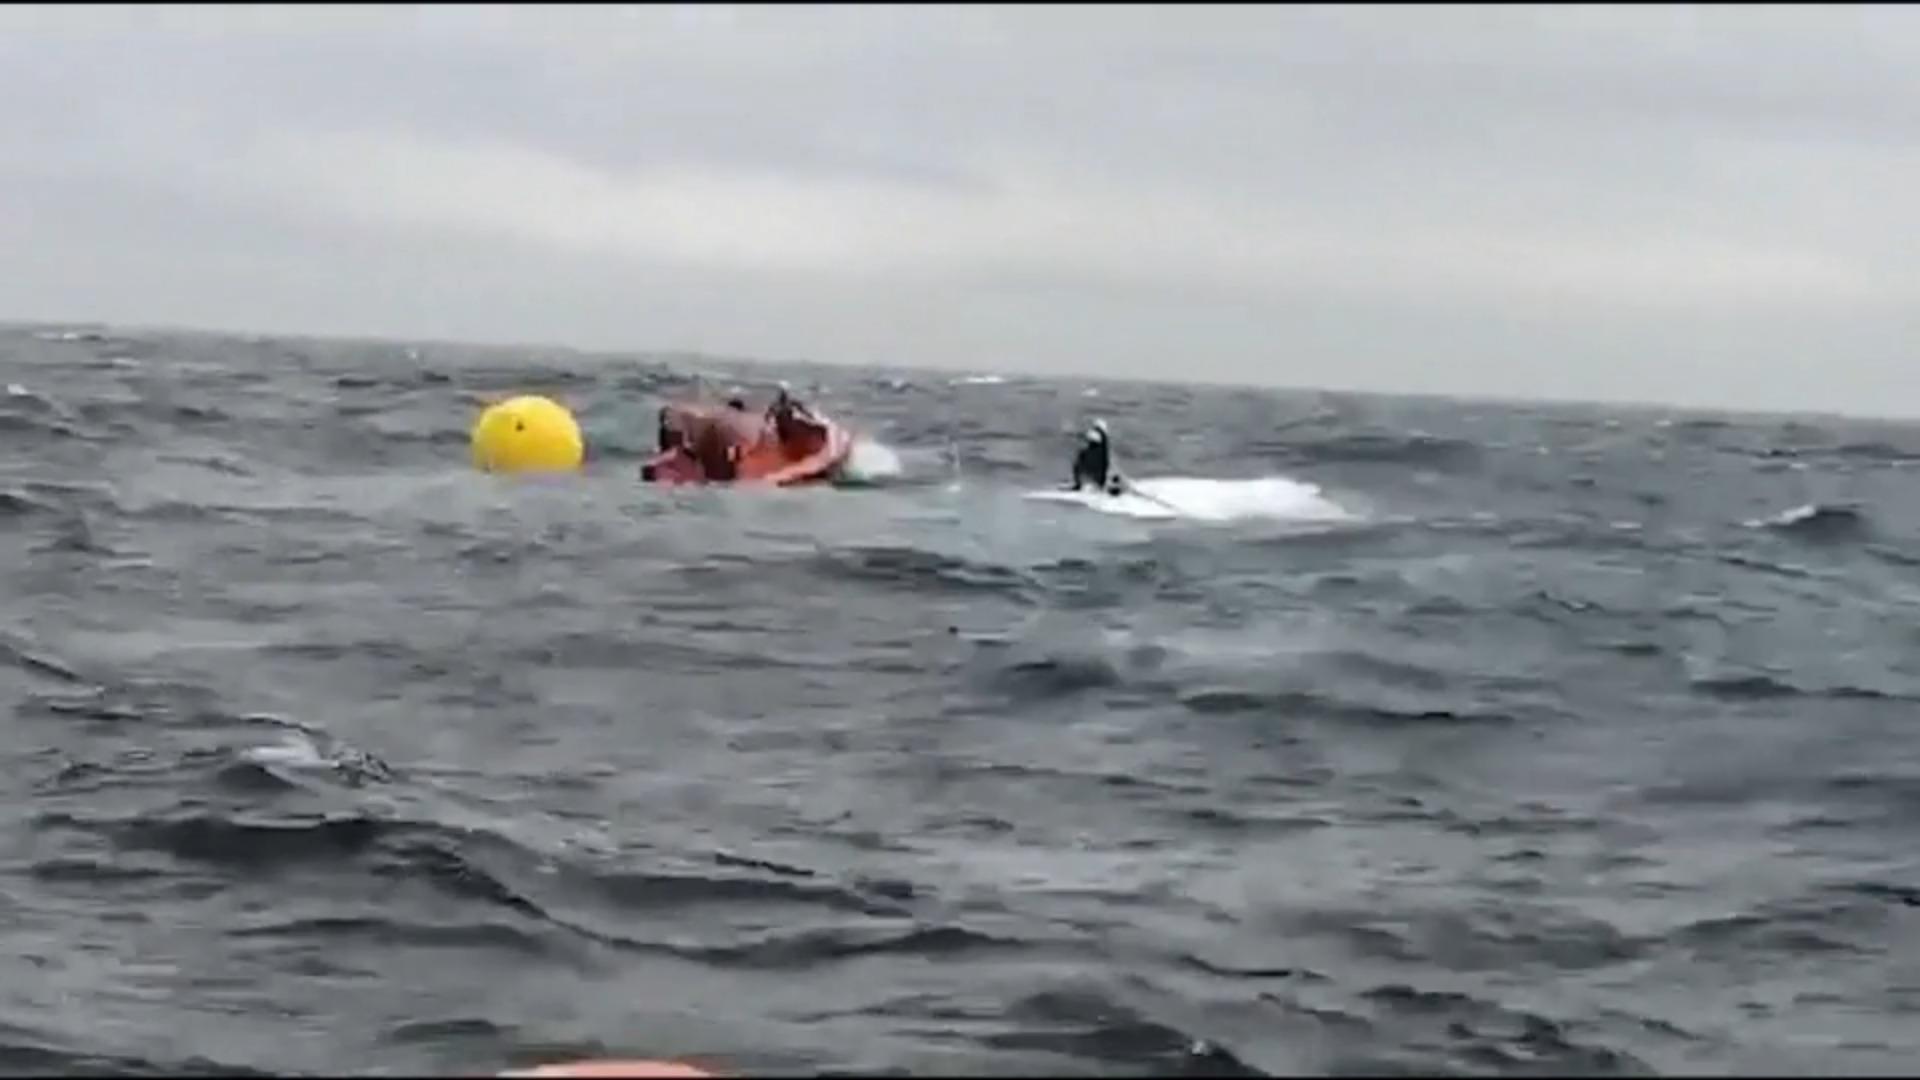 Sailor survives after 16 hours in small air bubble Boat capsized off Spain